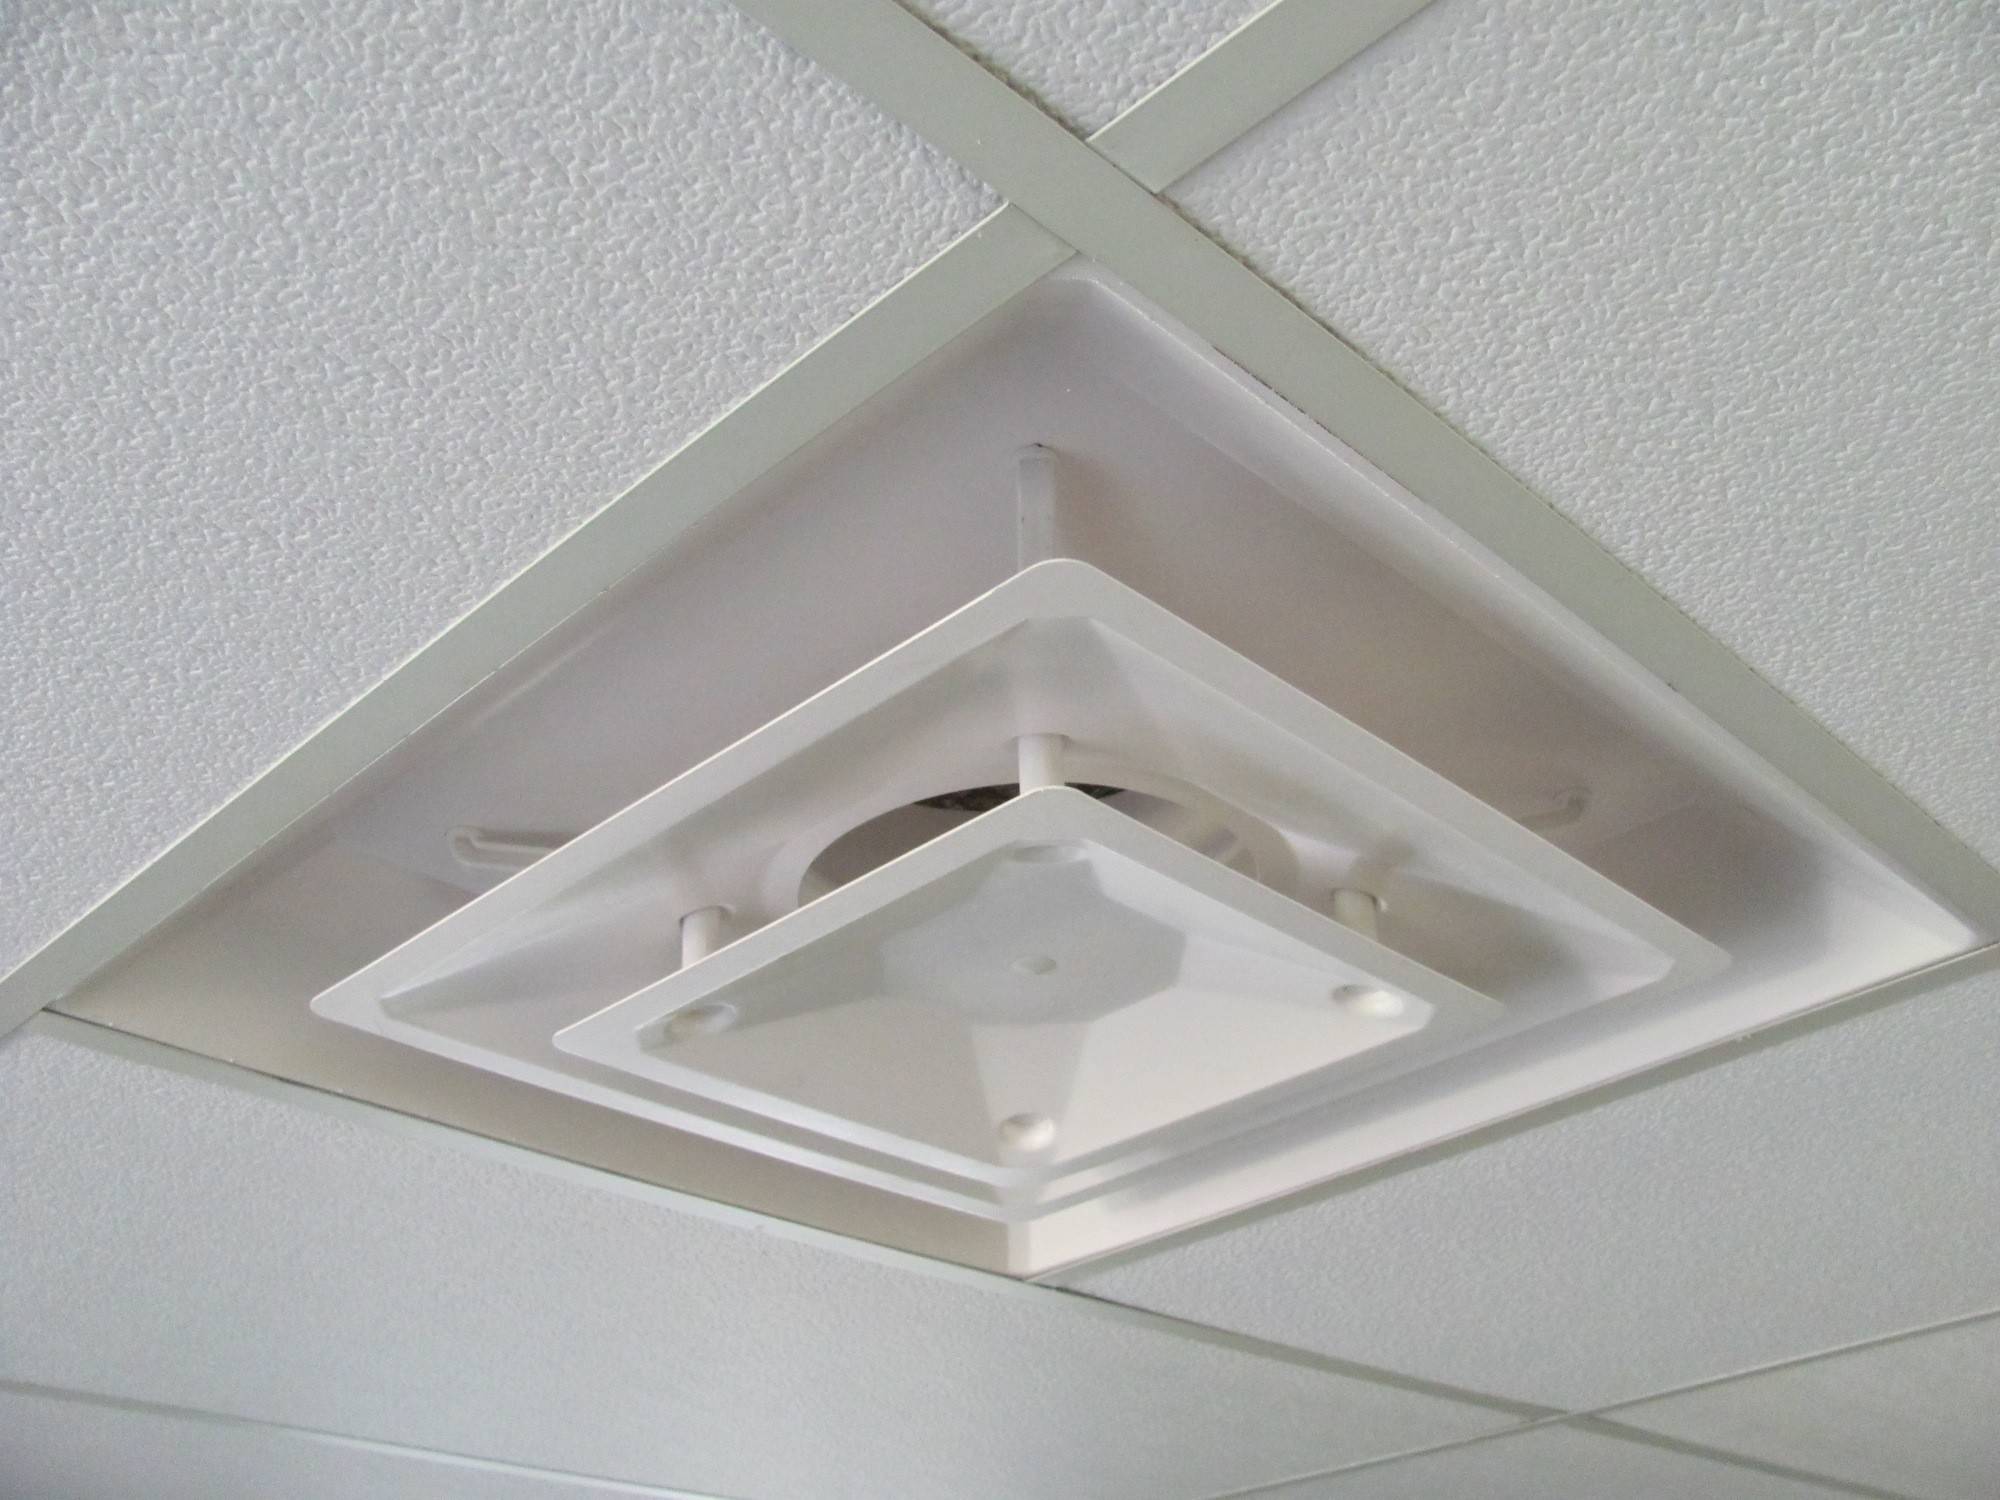 How To Cover A Vent On The Ceiling